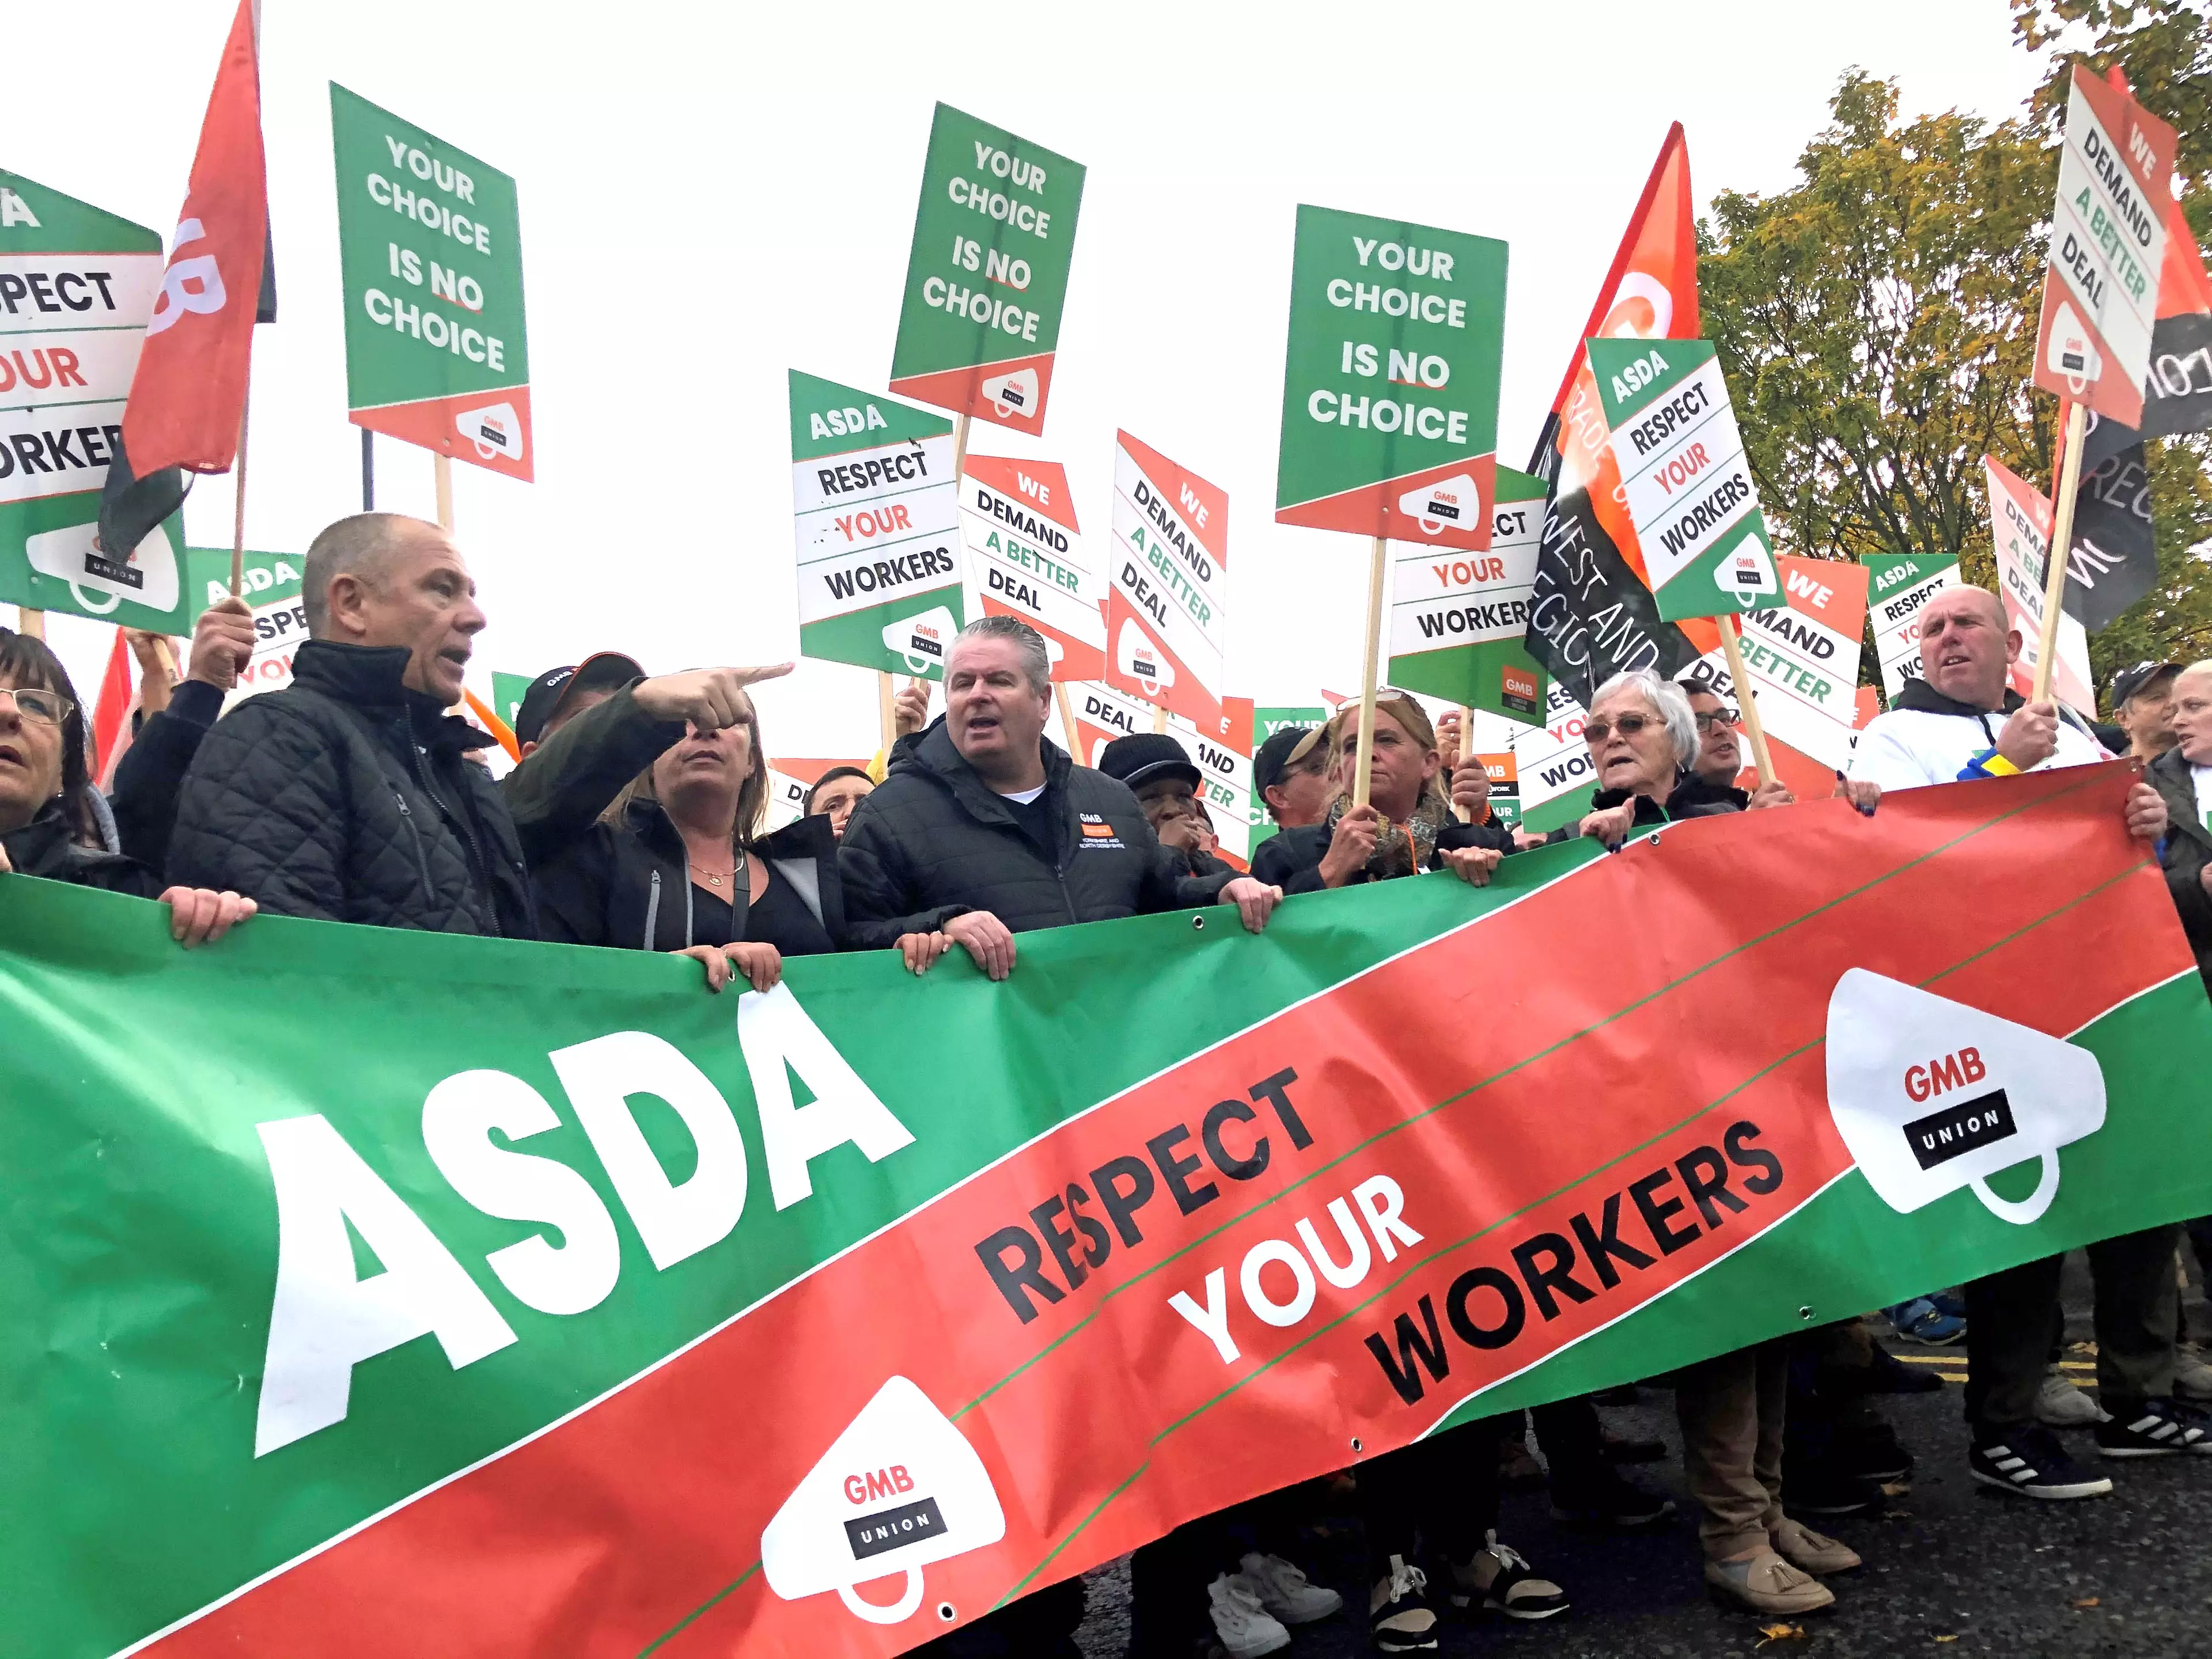 ASDA have received backlash following news of a contract they are asking employees to sign. Pictured, workers marching in October opposing the new contract (